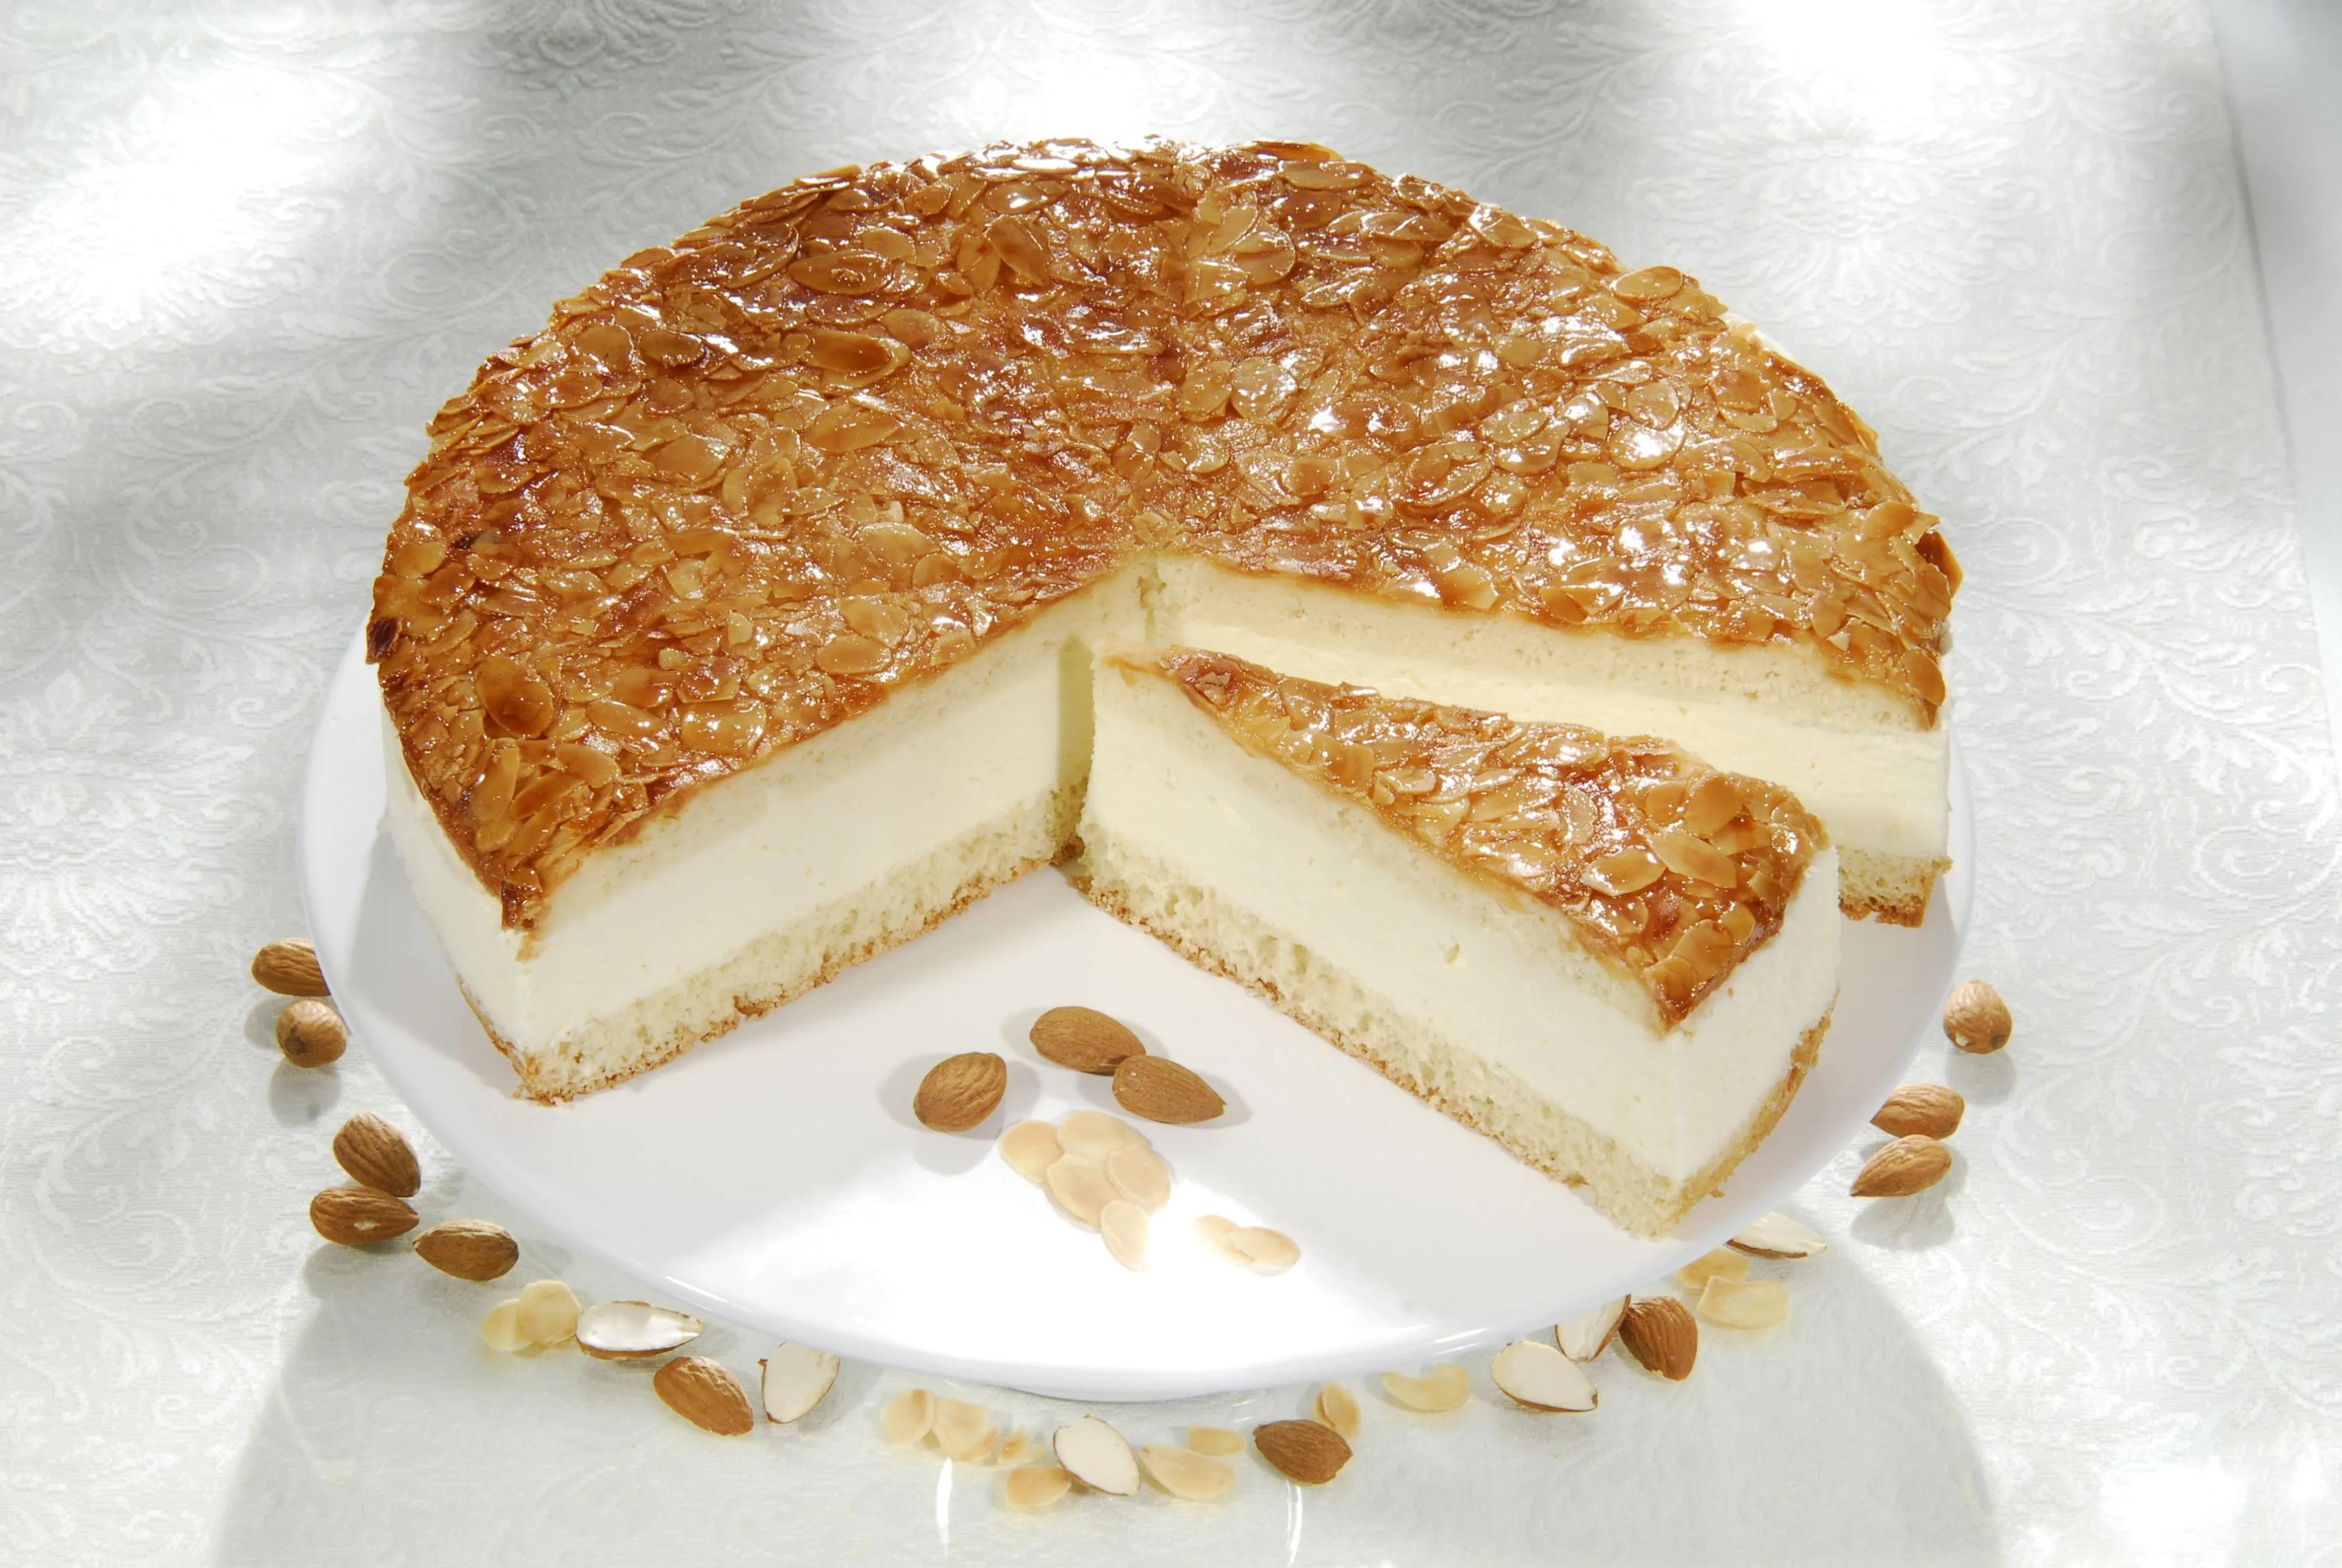 a white plate topped with a cheesecake covered in nuts